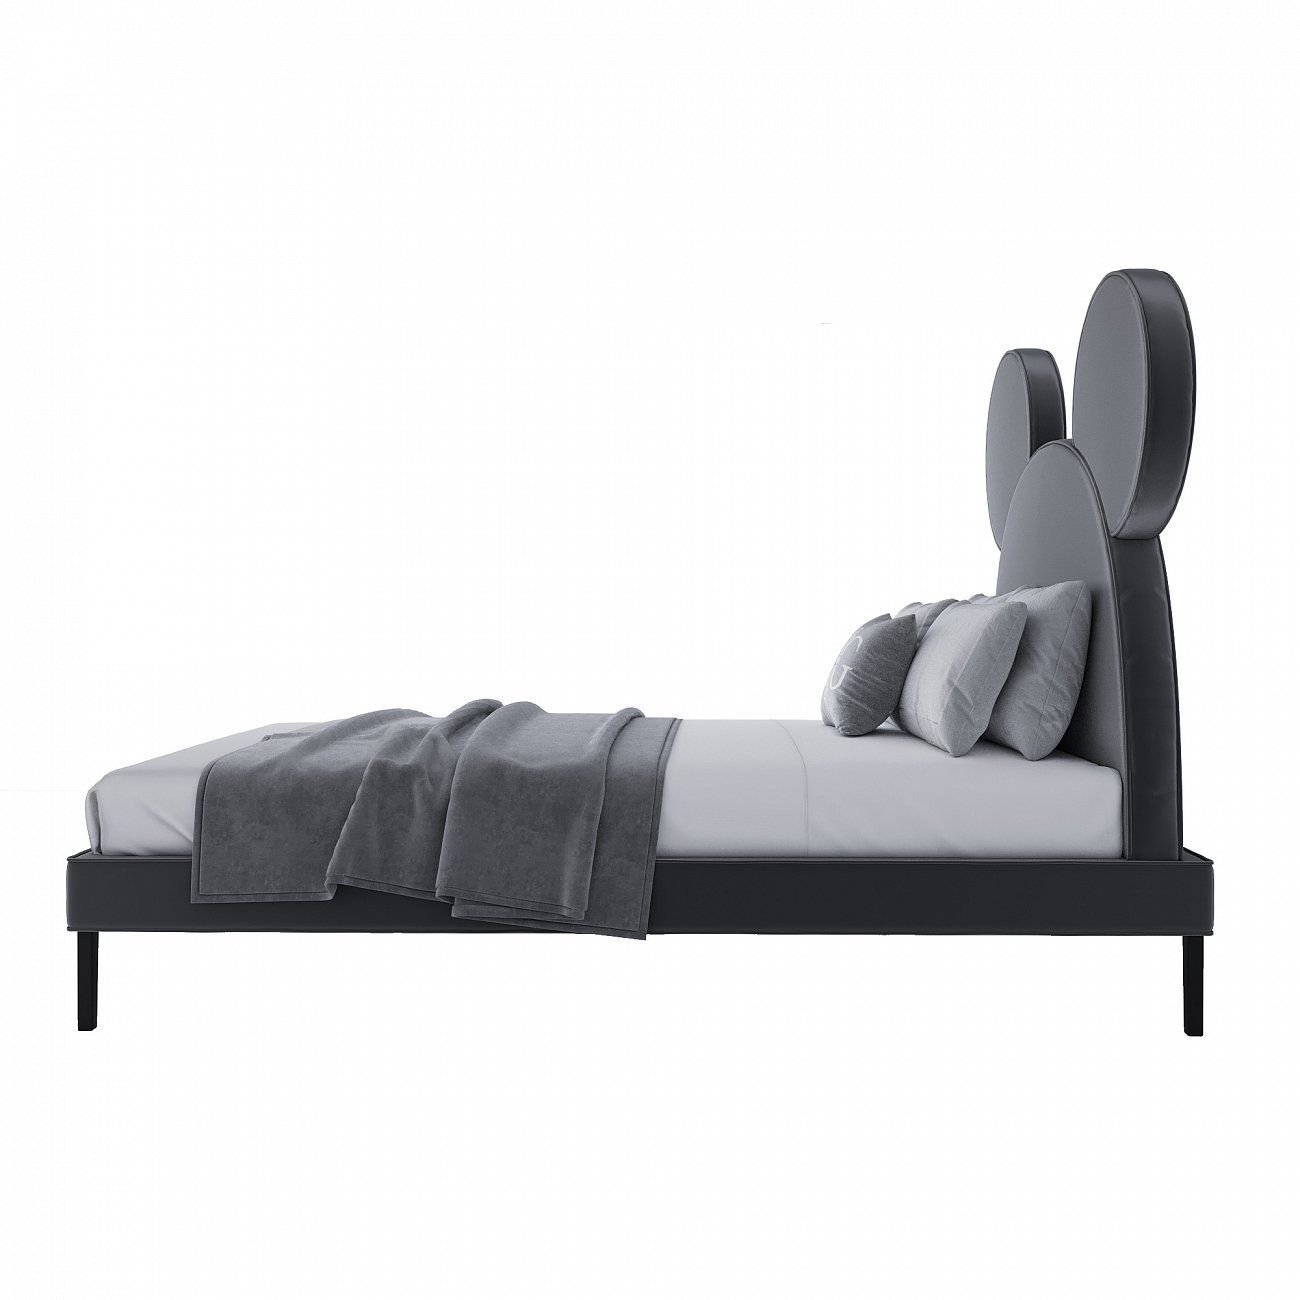 Children's bed 120x200 cm gray Mickey Mouse